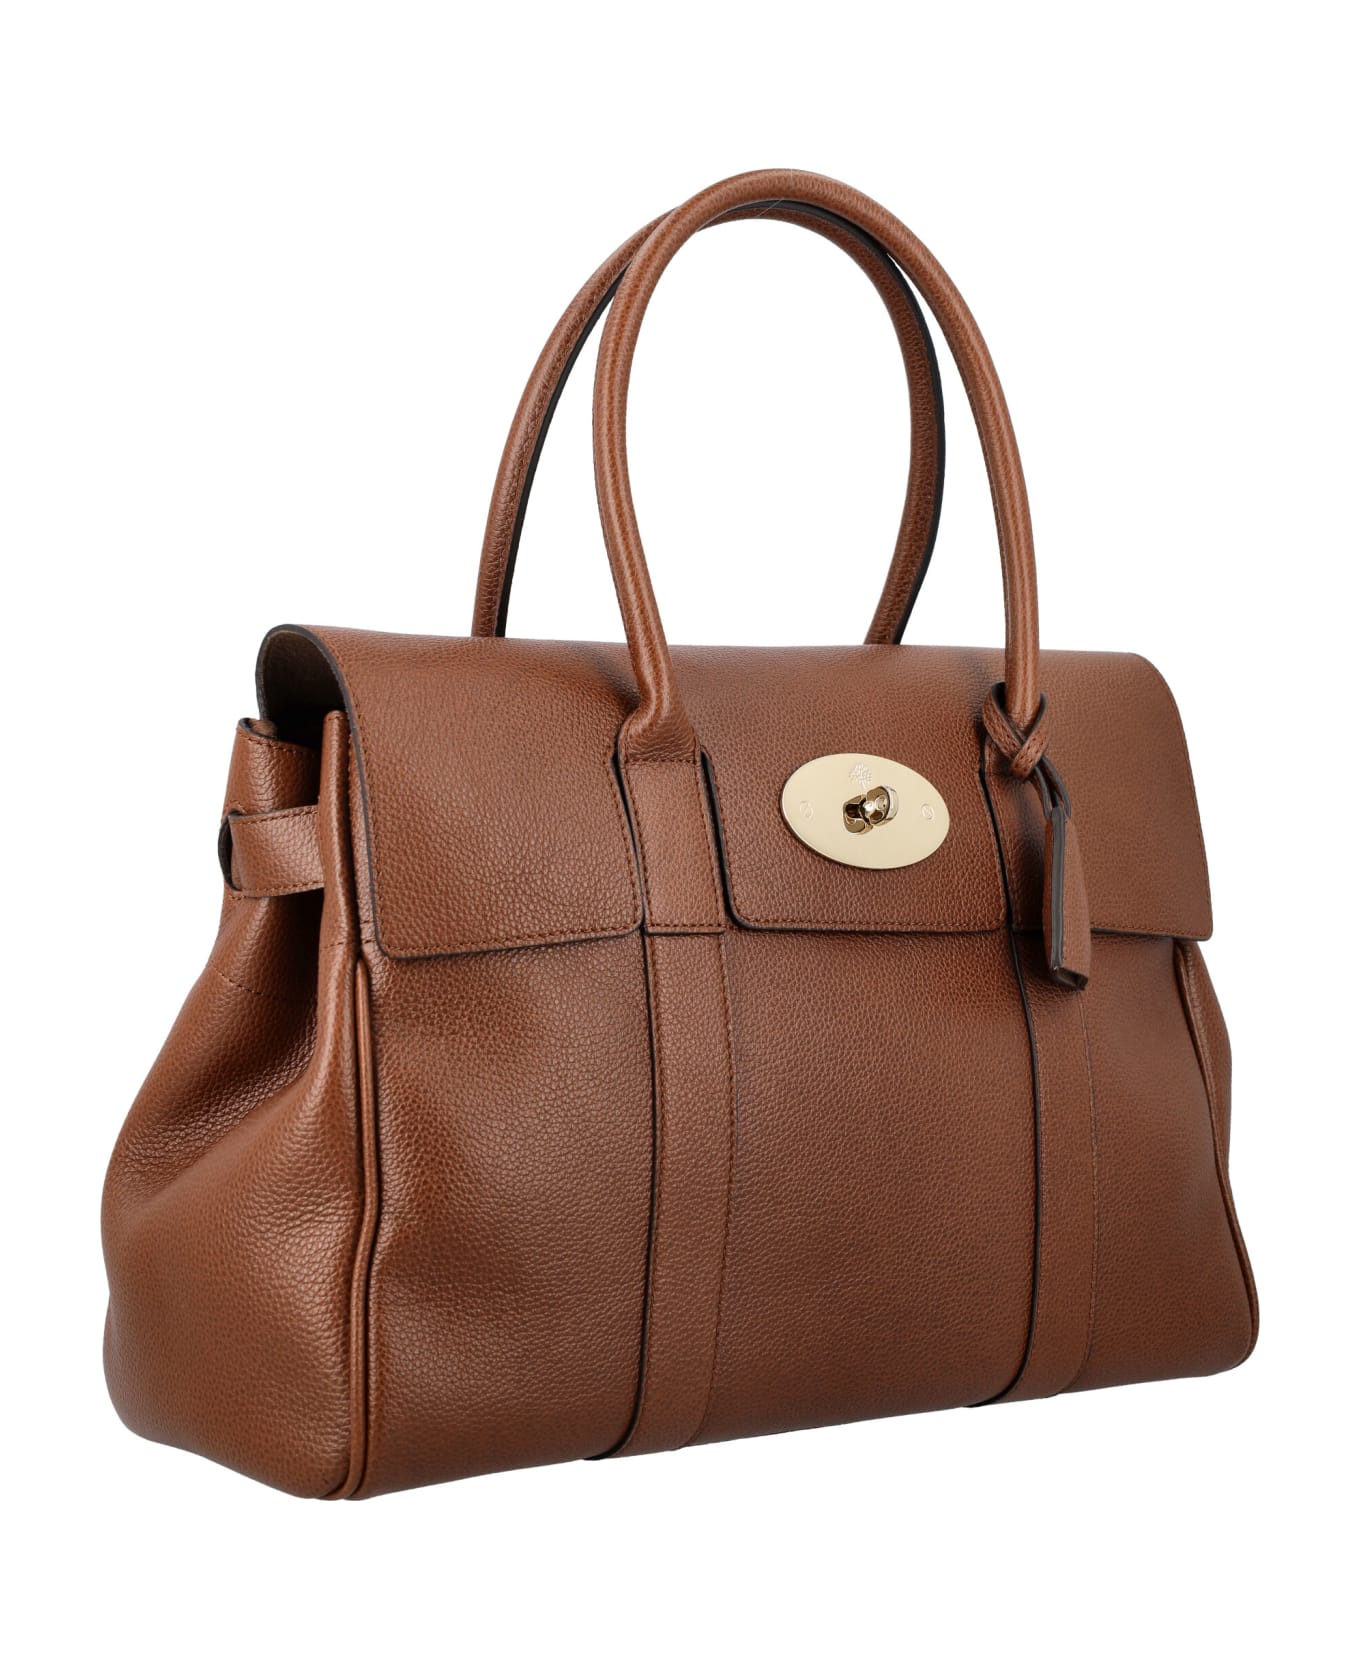 Mulberry Bayswater - OAK トートバッグ